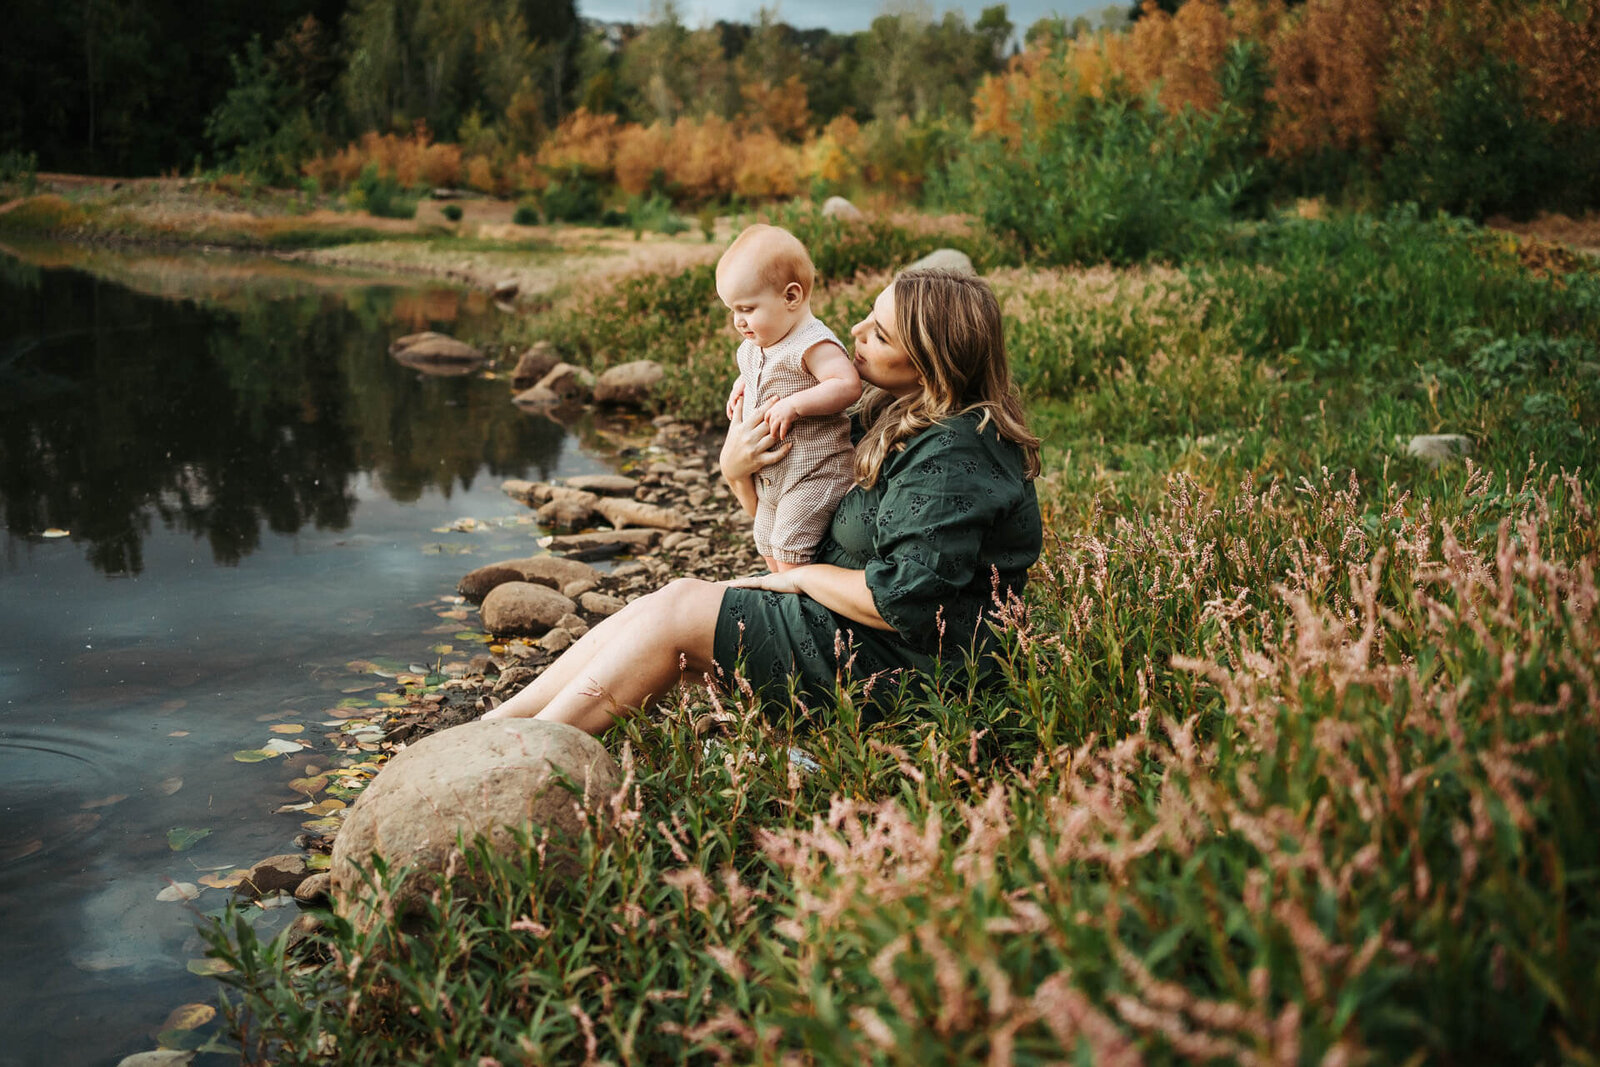 Mom in green dress holding her baby on her lap and looking at the pond